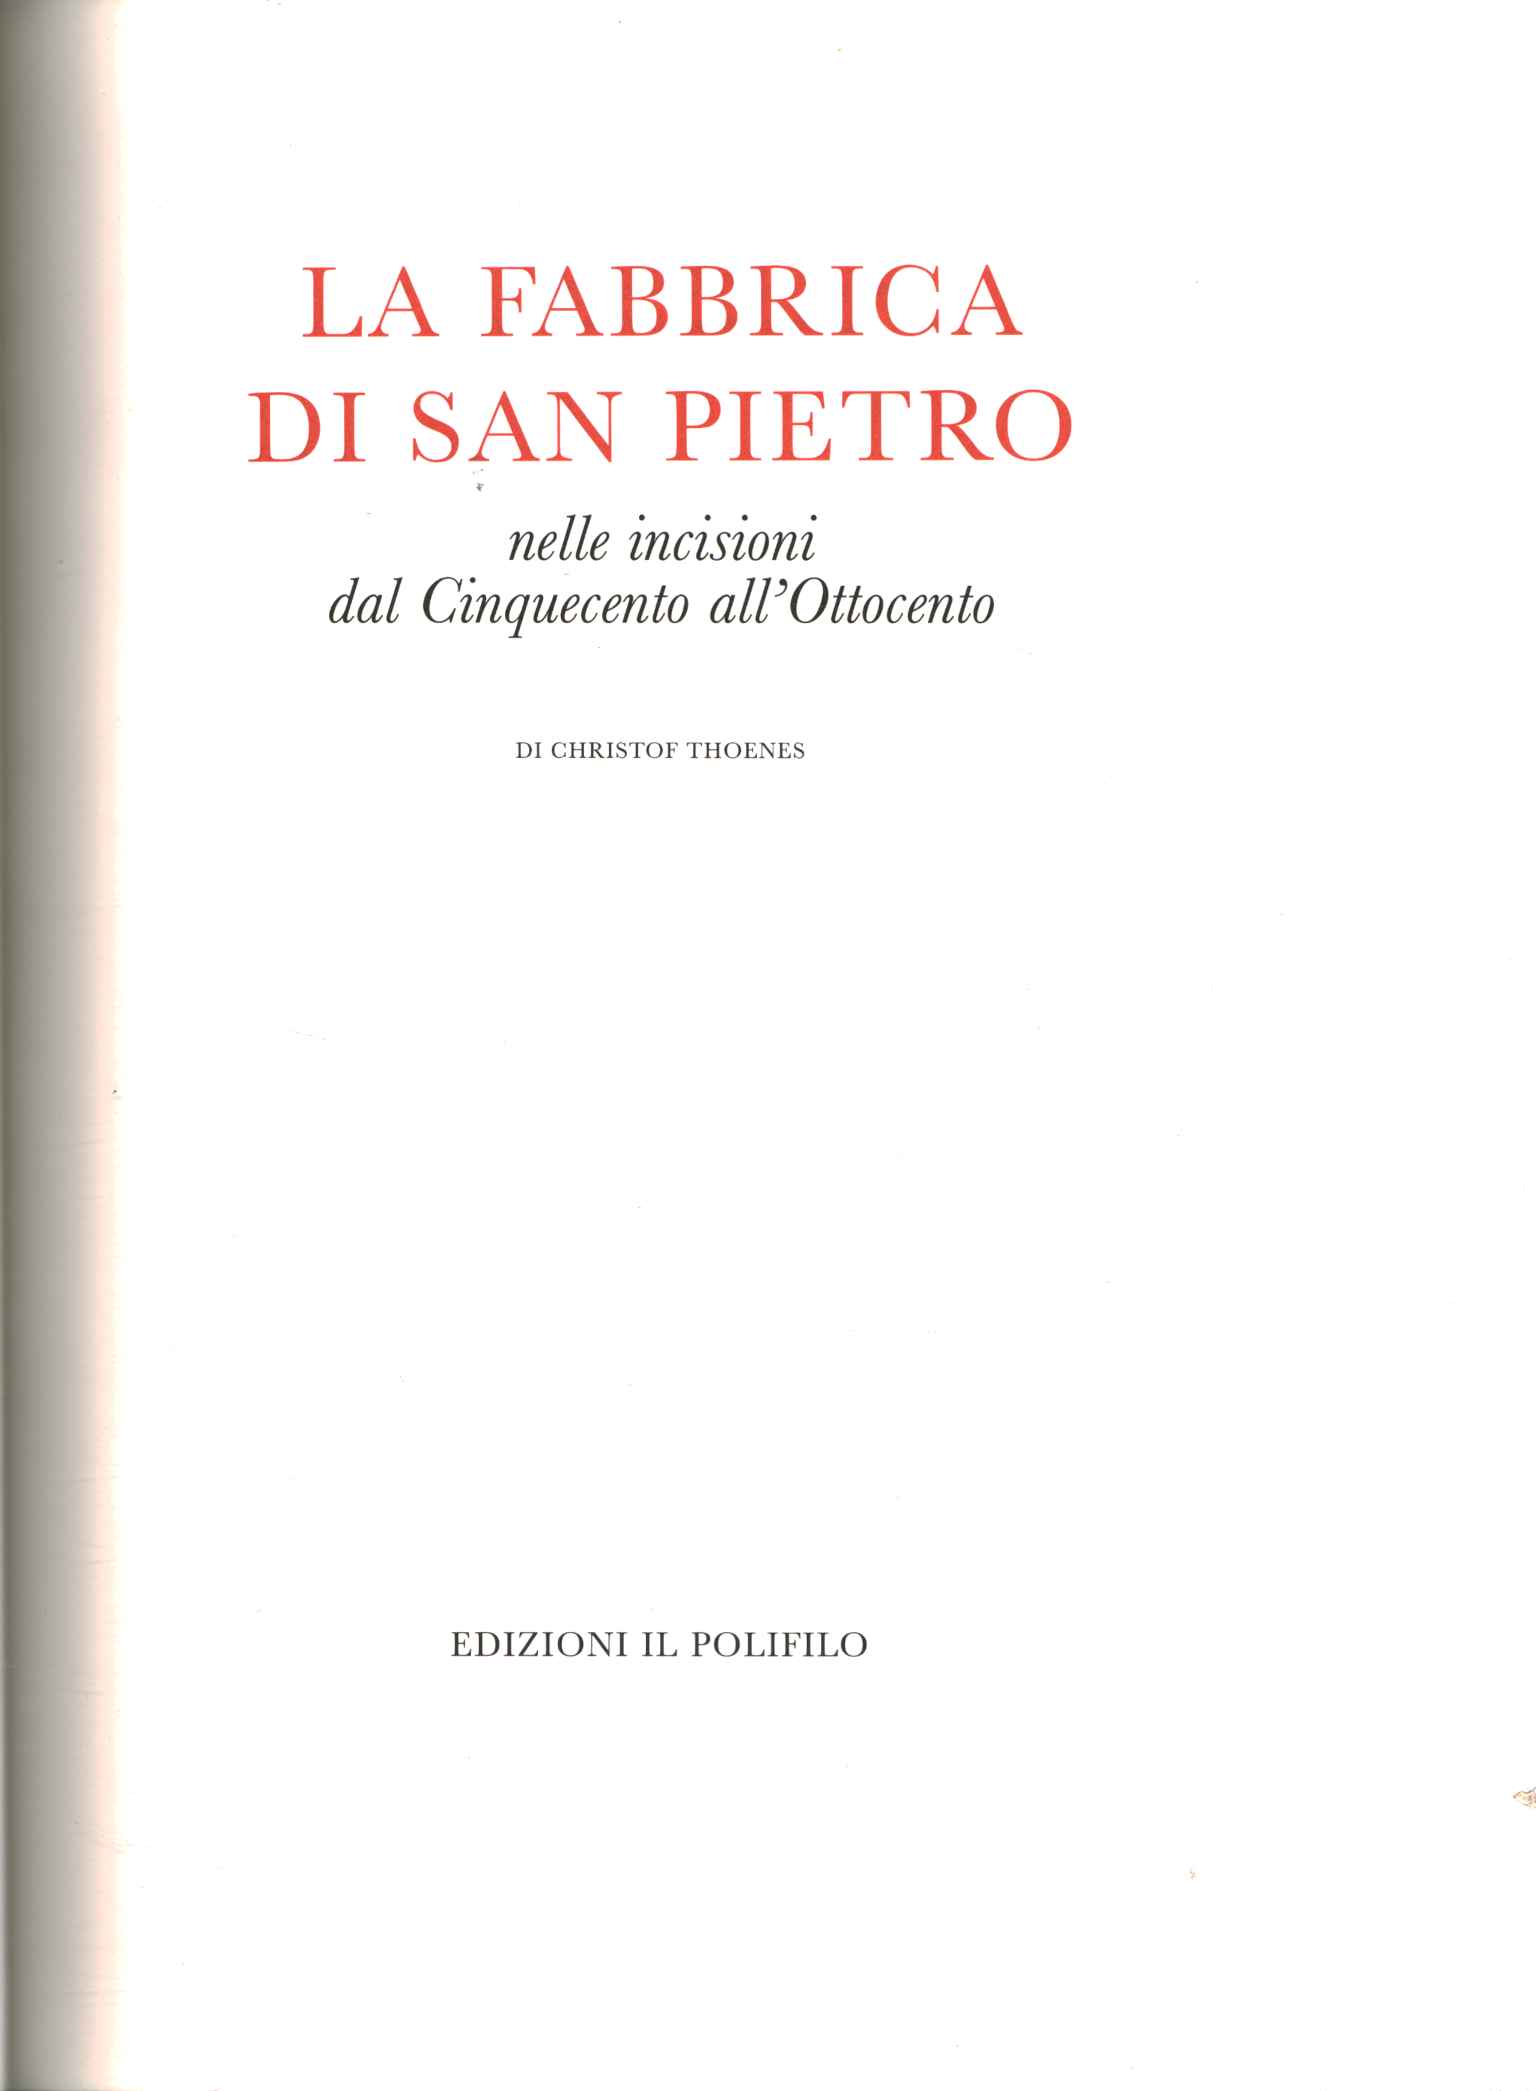 The factory of San Pietro in the engravings